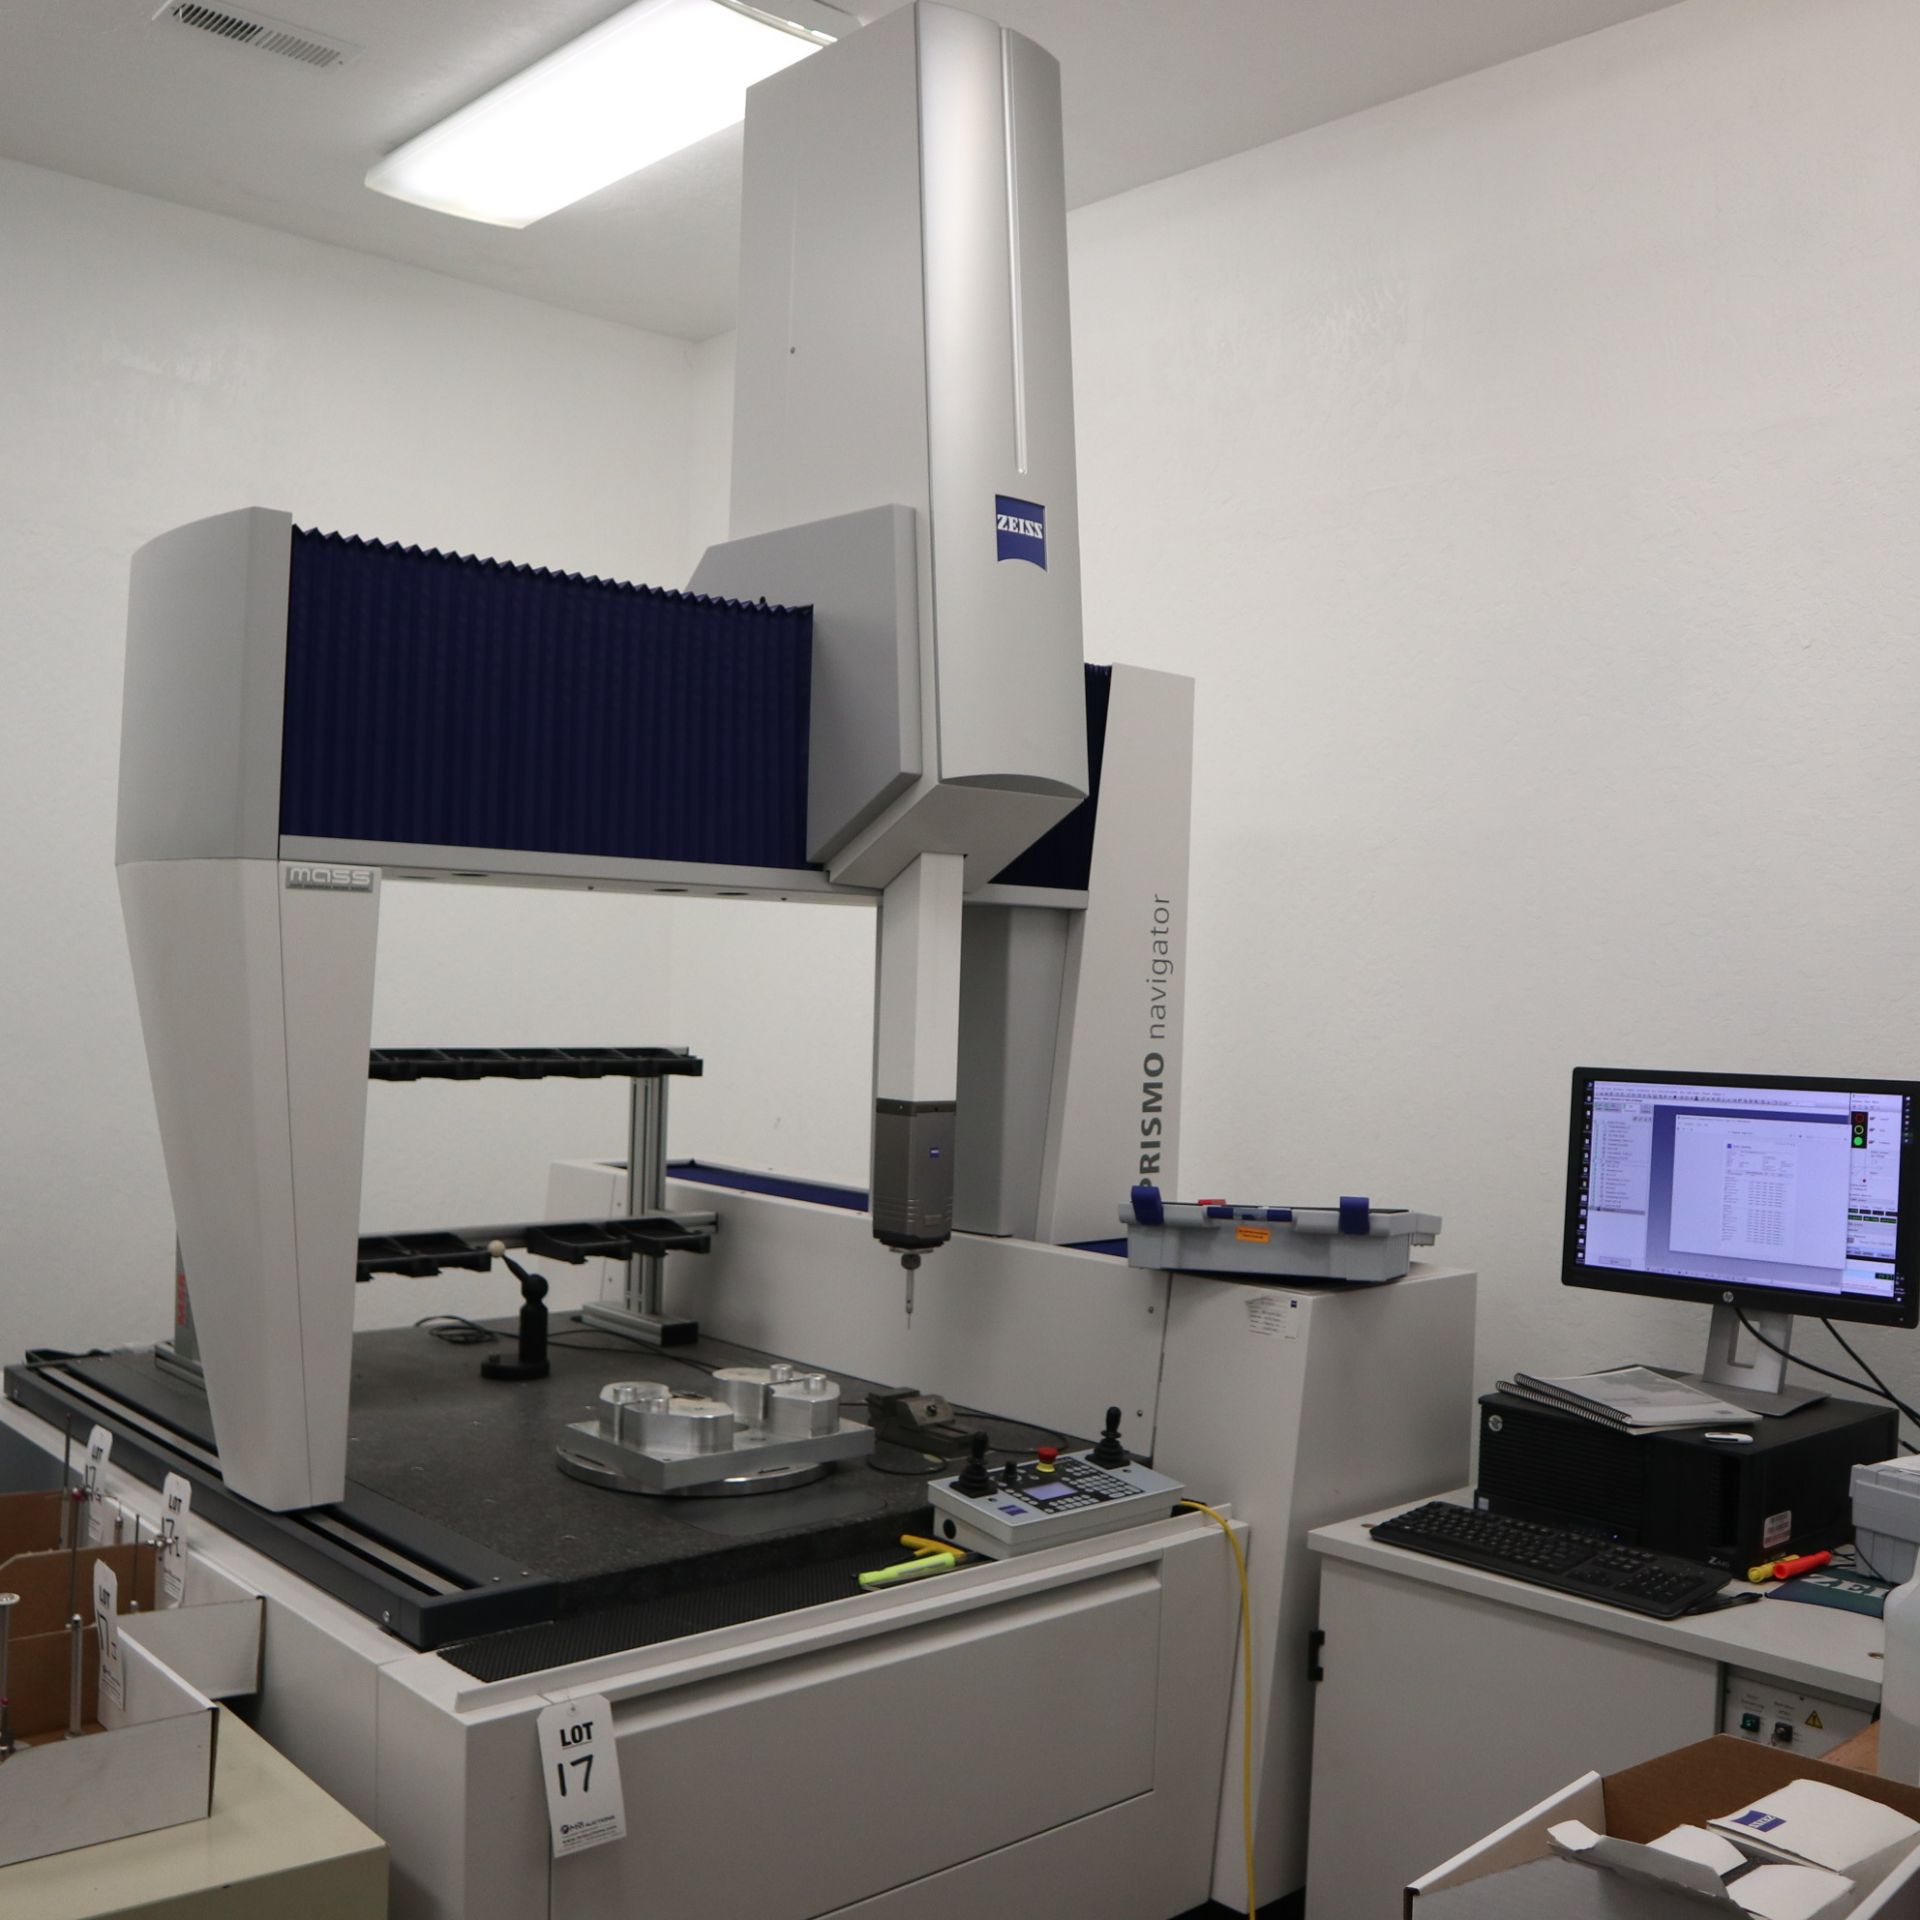 2016 ZEISS PRISMO NAVIGATOR CMM WITH MULTI APPLICATION SENSOR SYSTEM AND SENSOR RACK, POWER SUPPLY, - Image 23 of 69